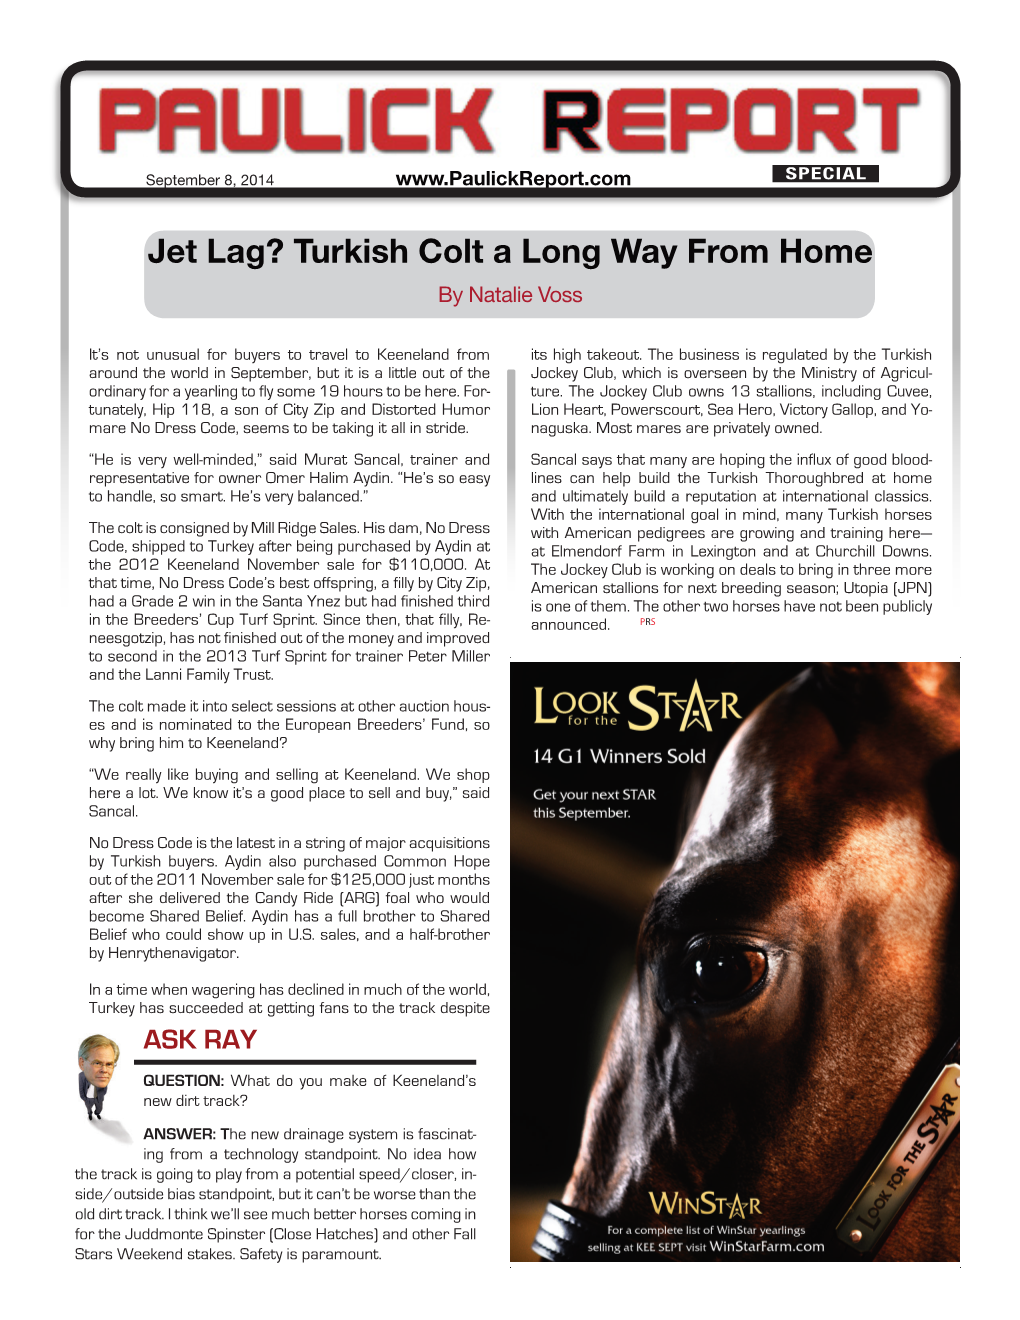 Jet Lag? Turkish Colt a Long Way from Home by Natalie Voss